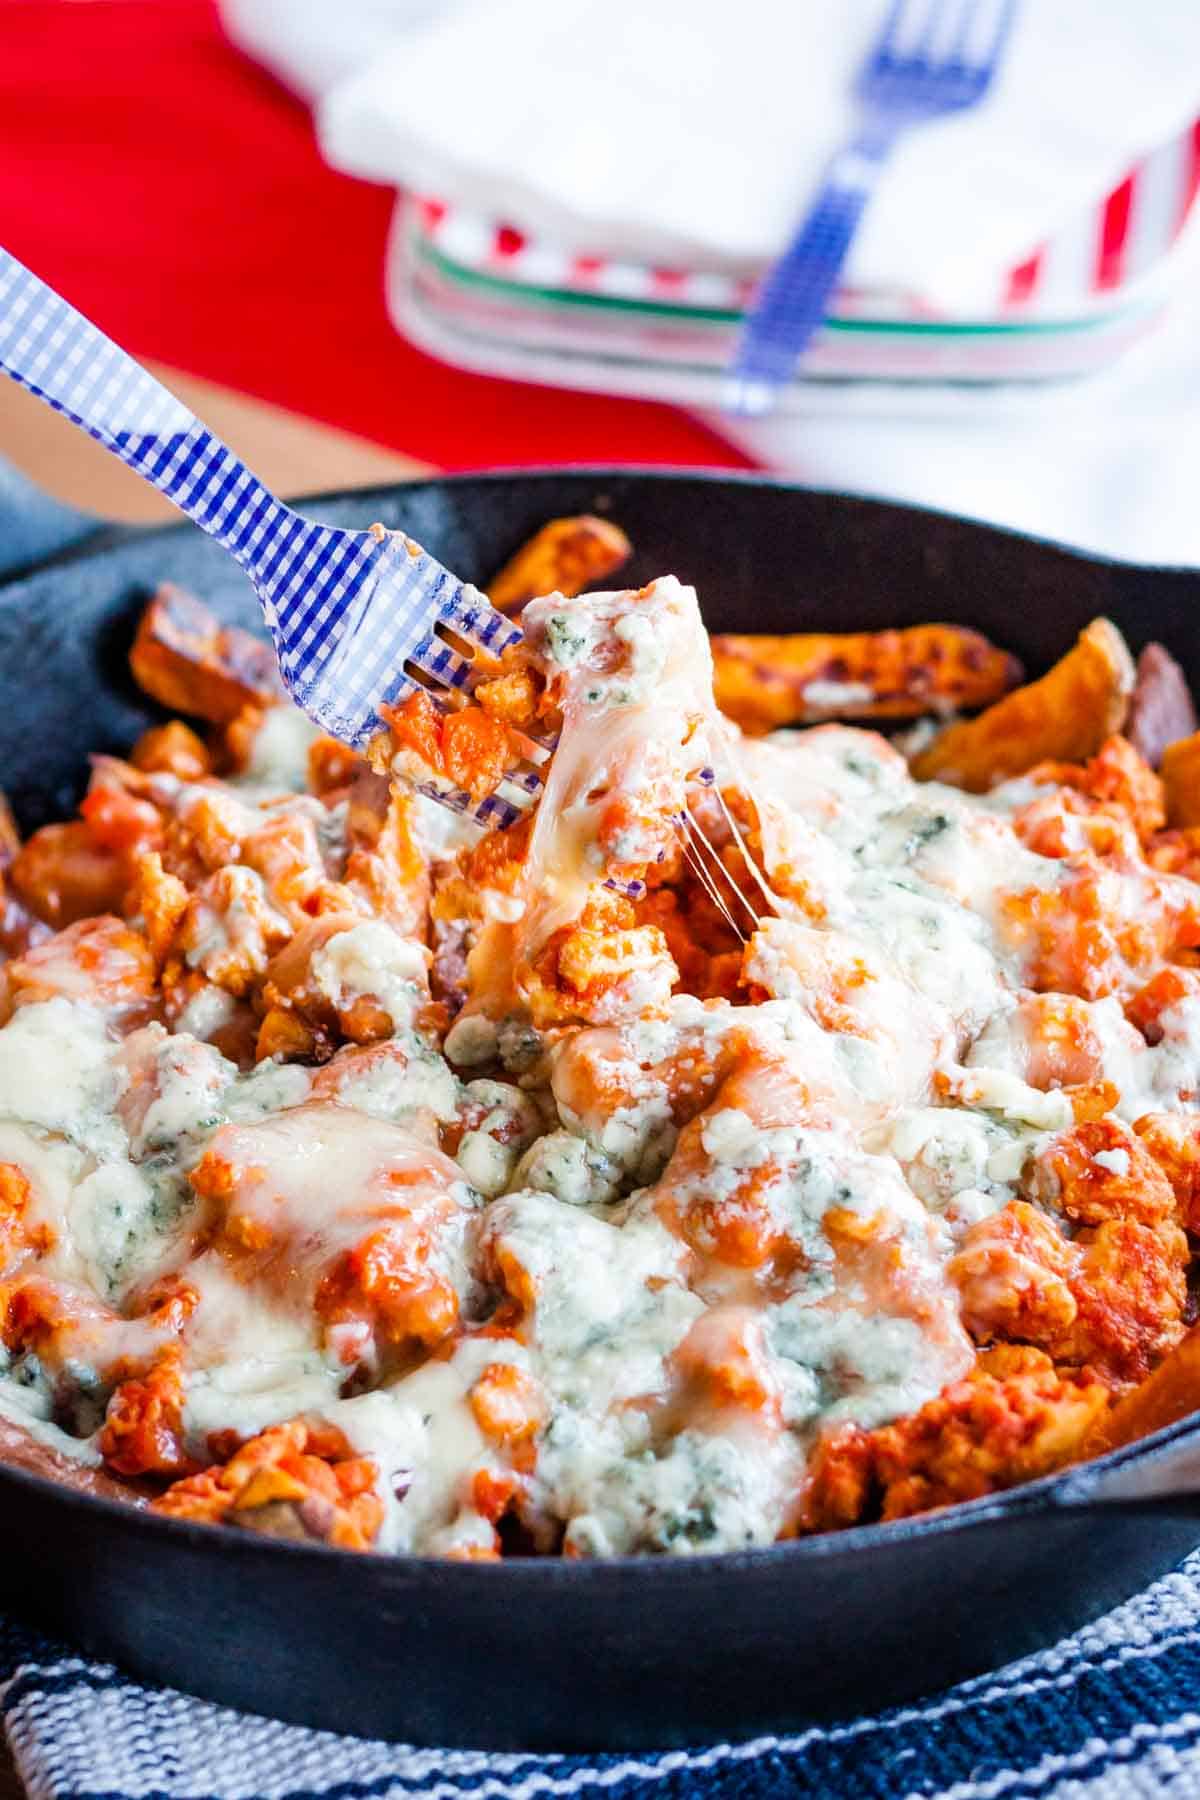 Skillet filled with buffalo chicken fries.